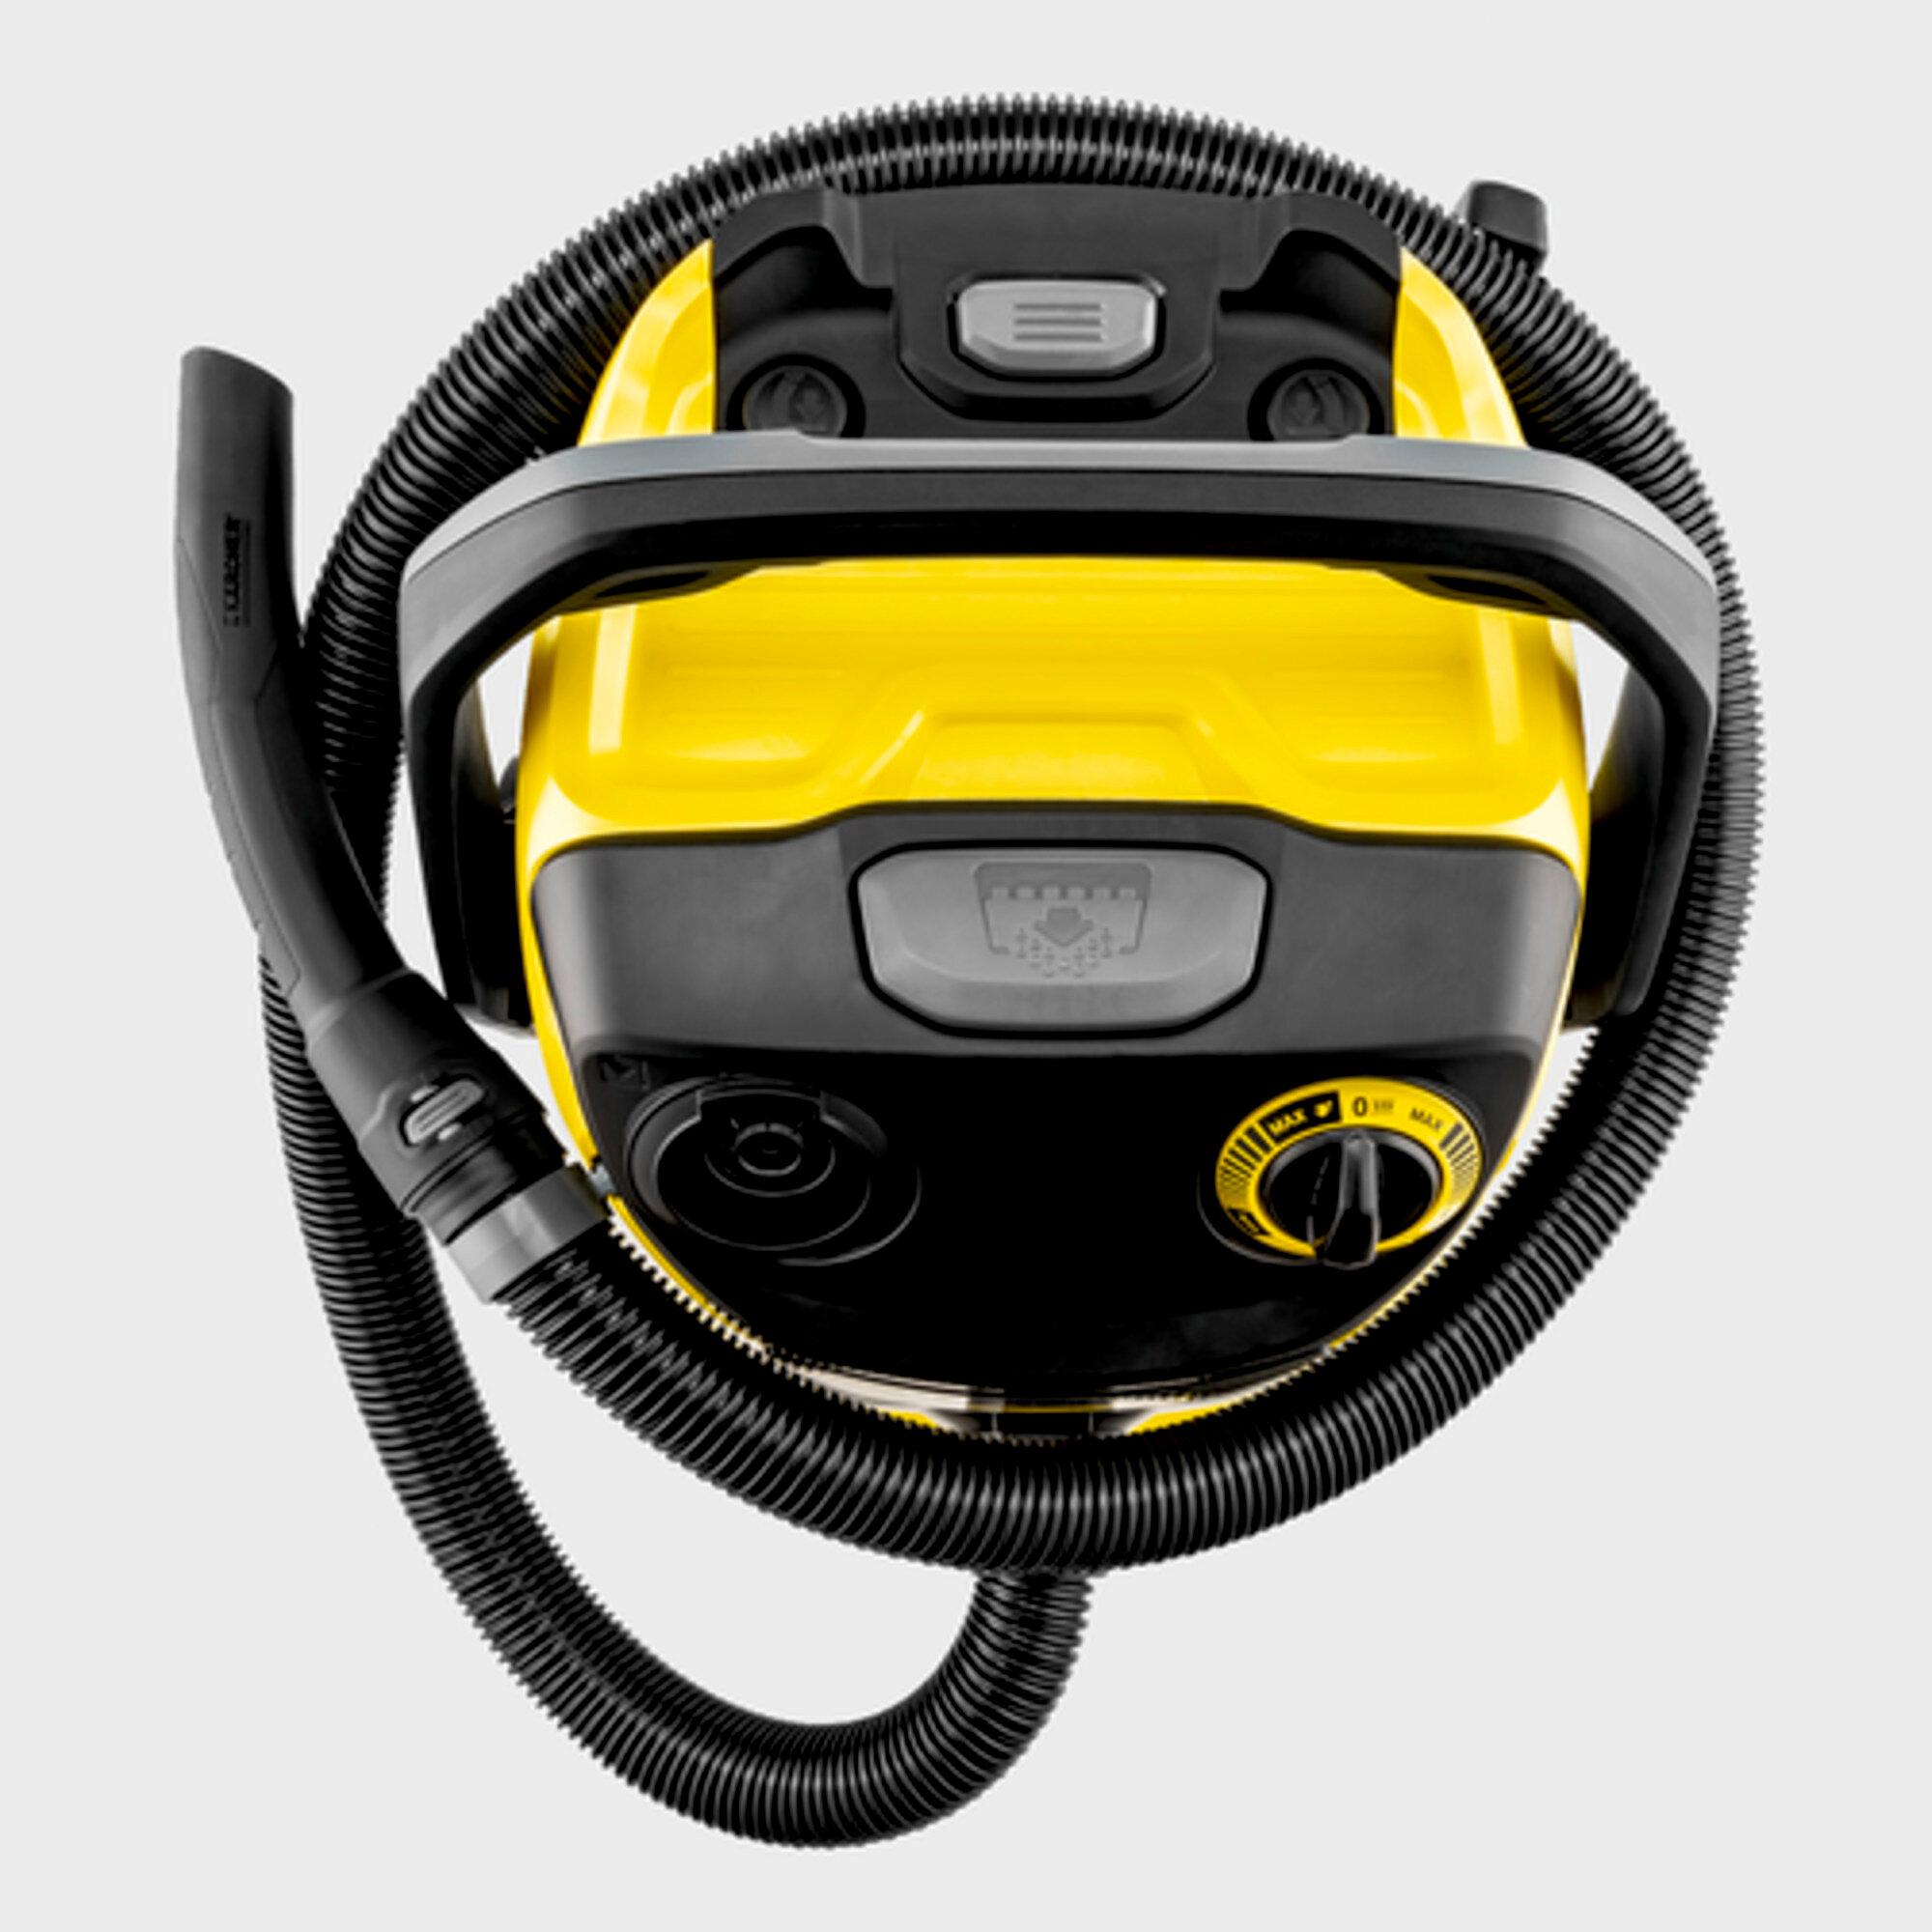 Wet and Dry Vacuum Cleaner WD 5: Hose storage on the device head